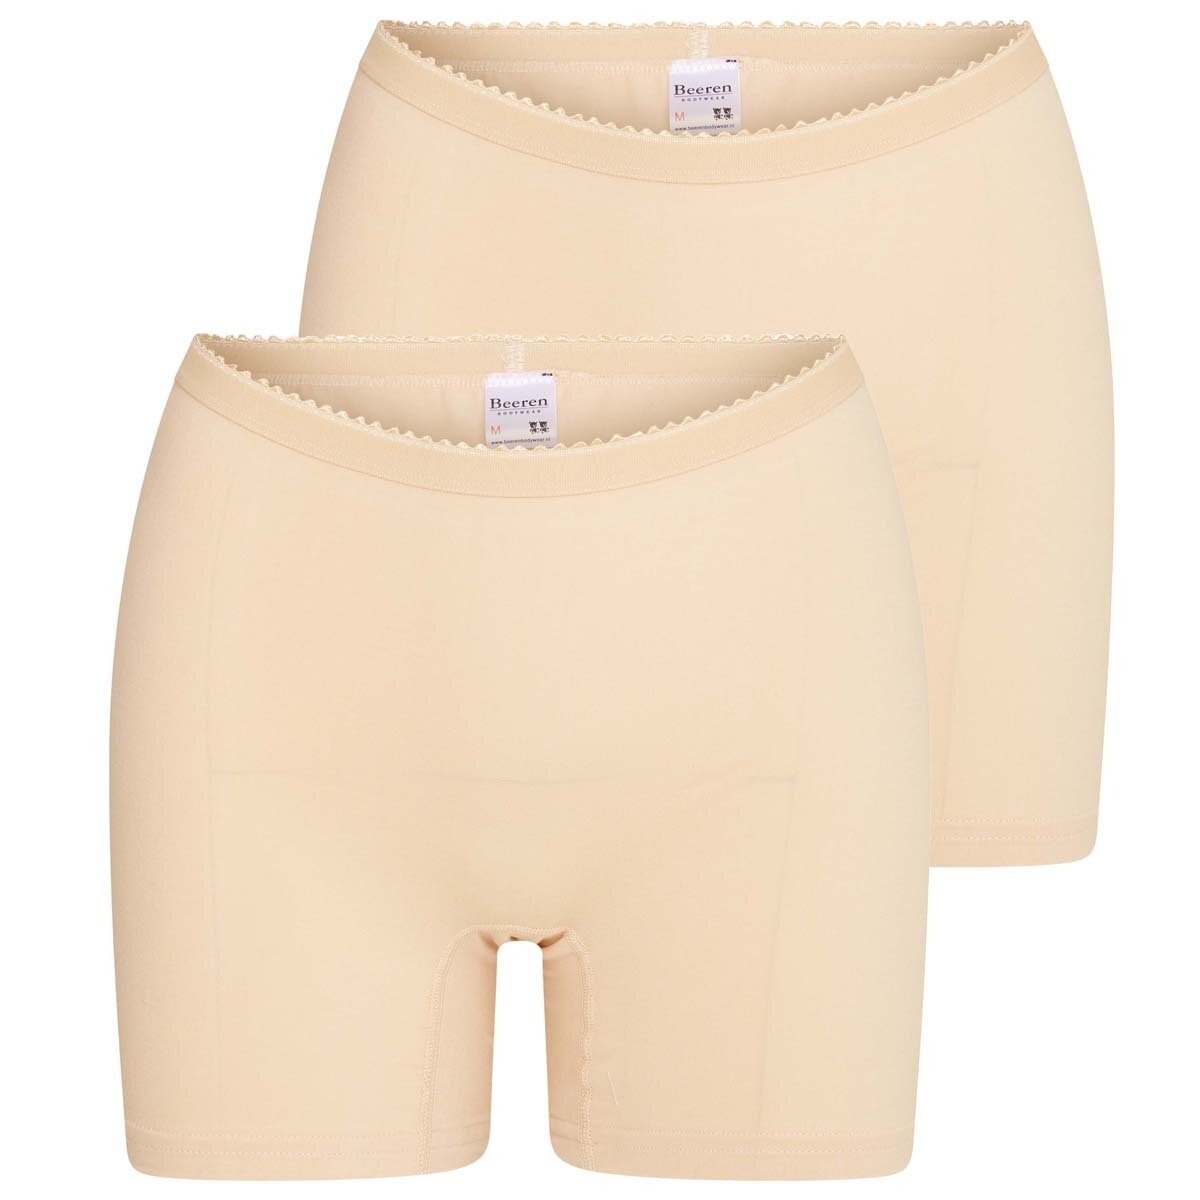 (02-417) Dames boxer 2-pack Softly huid L